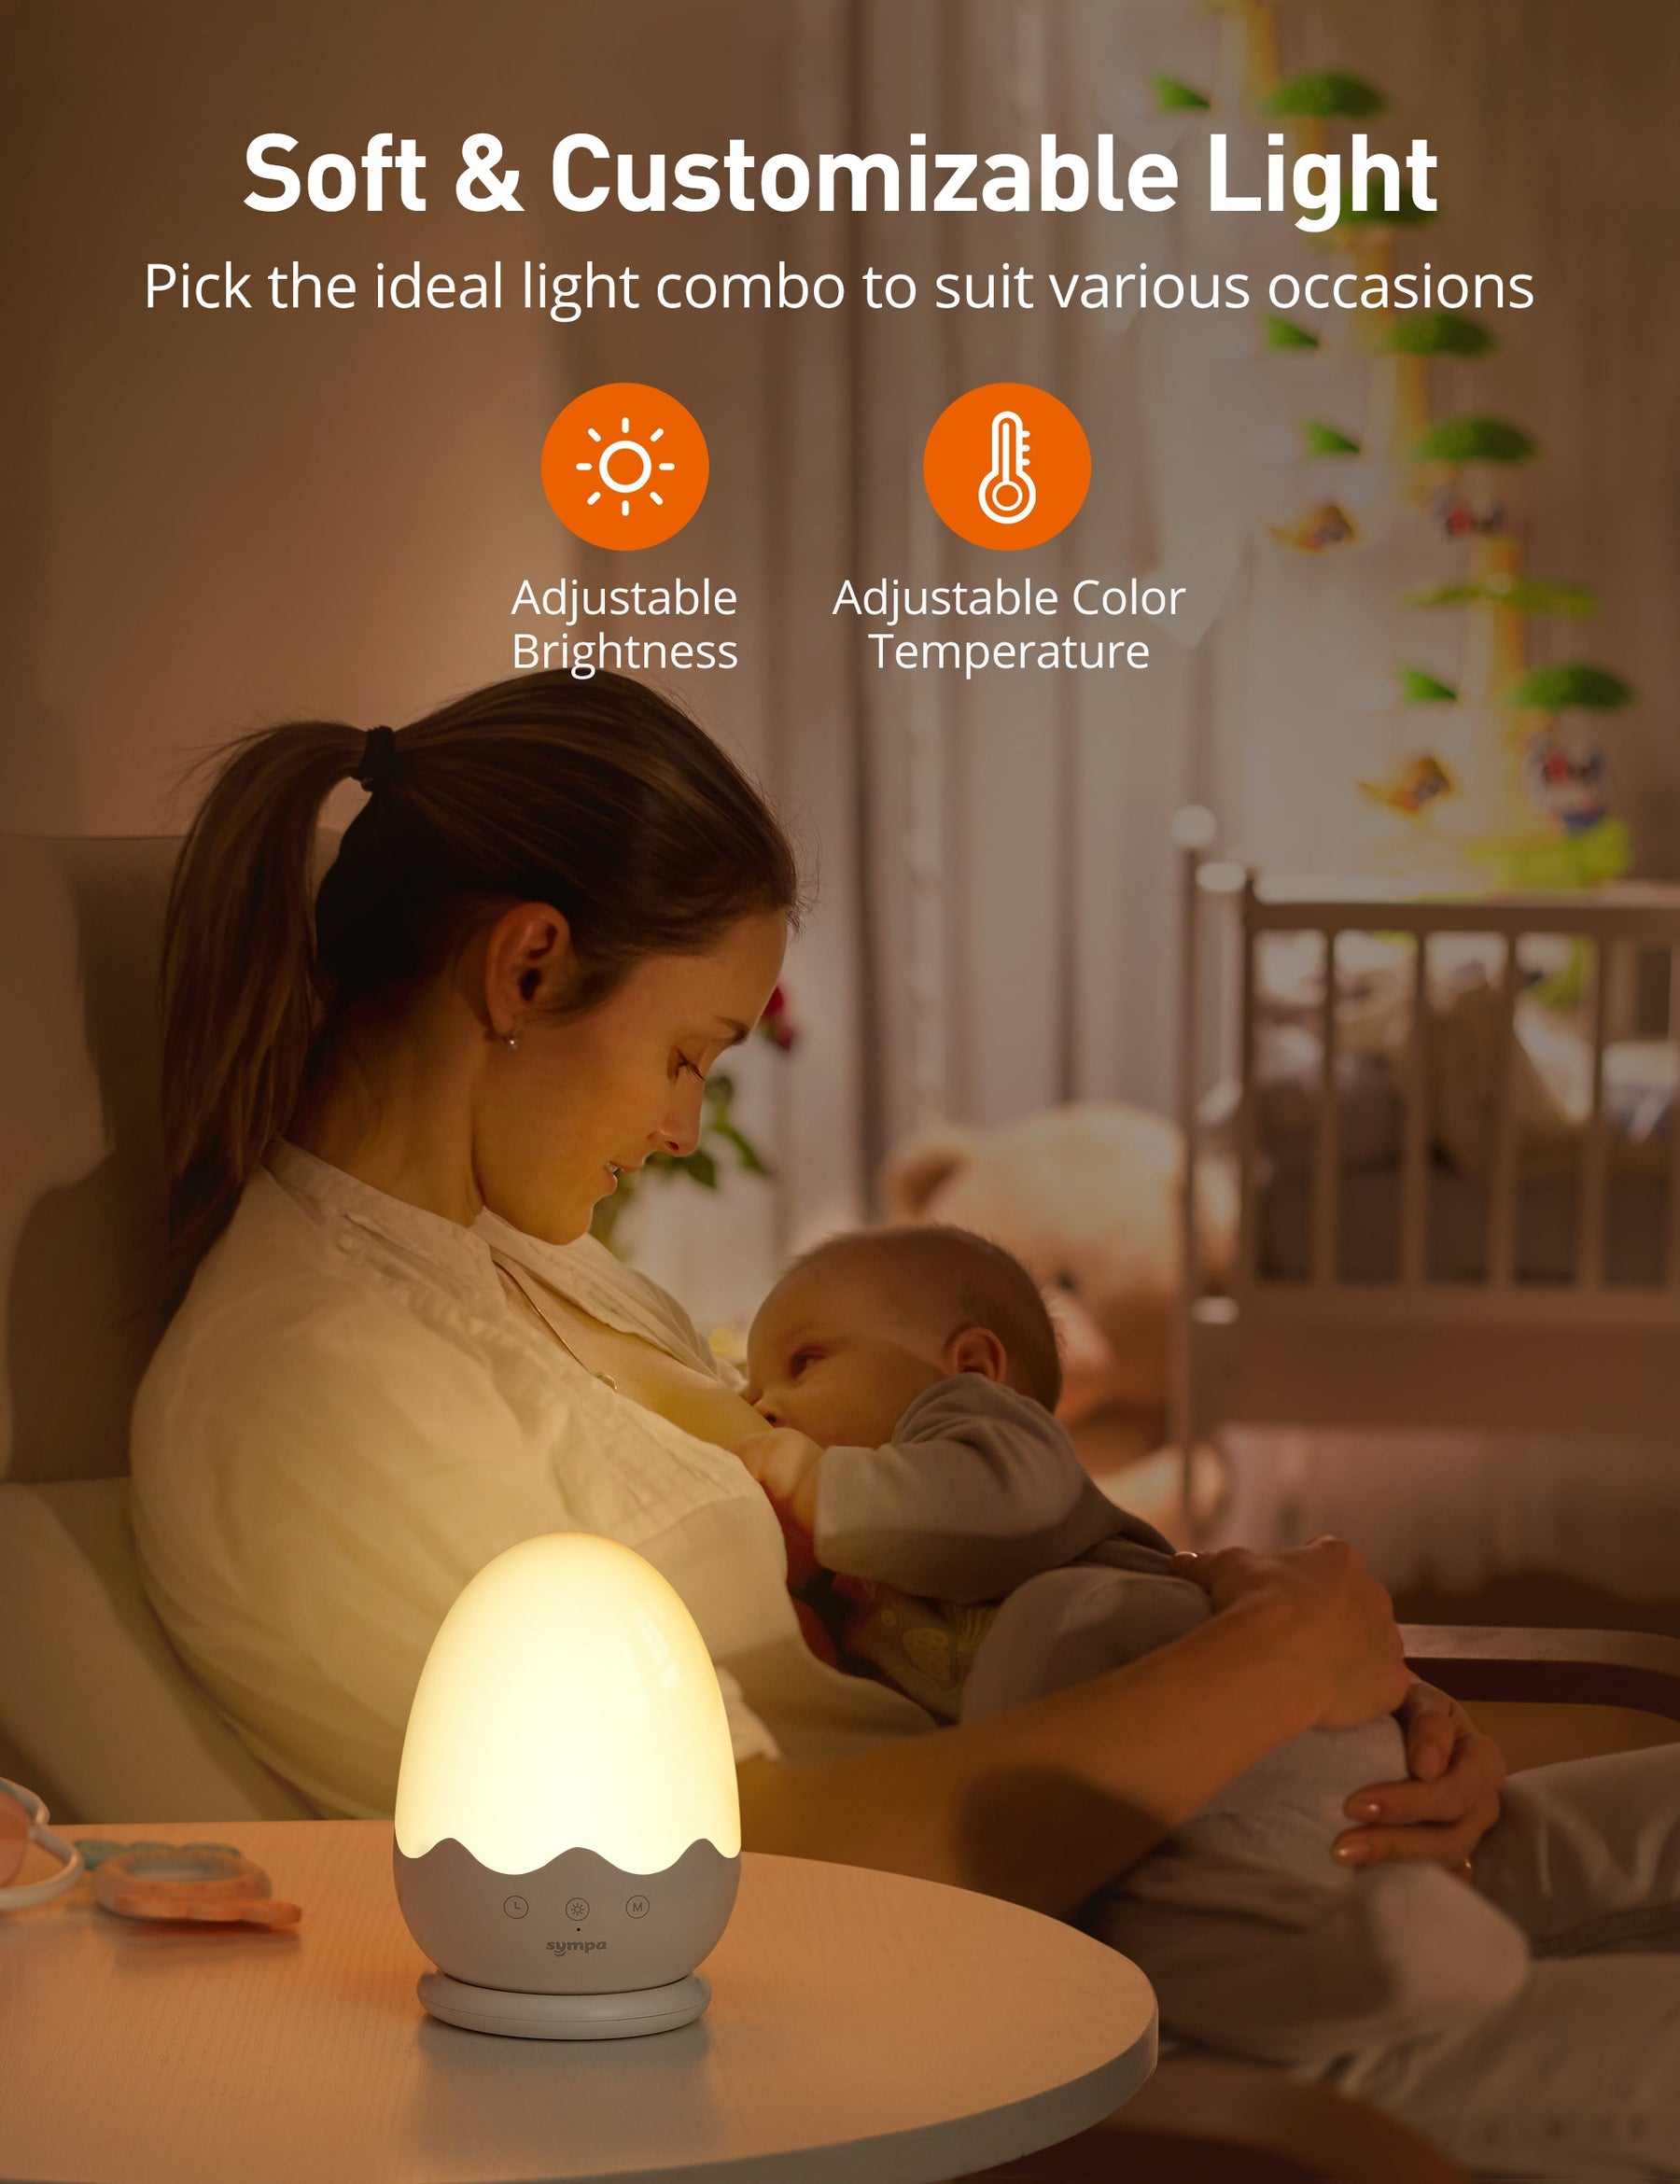 Sympa Night Light For Kids CL038, With Charging Pad, Touch Control-Night Lights-ParisRhone